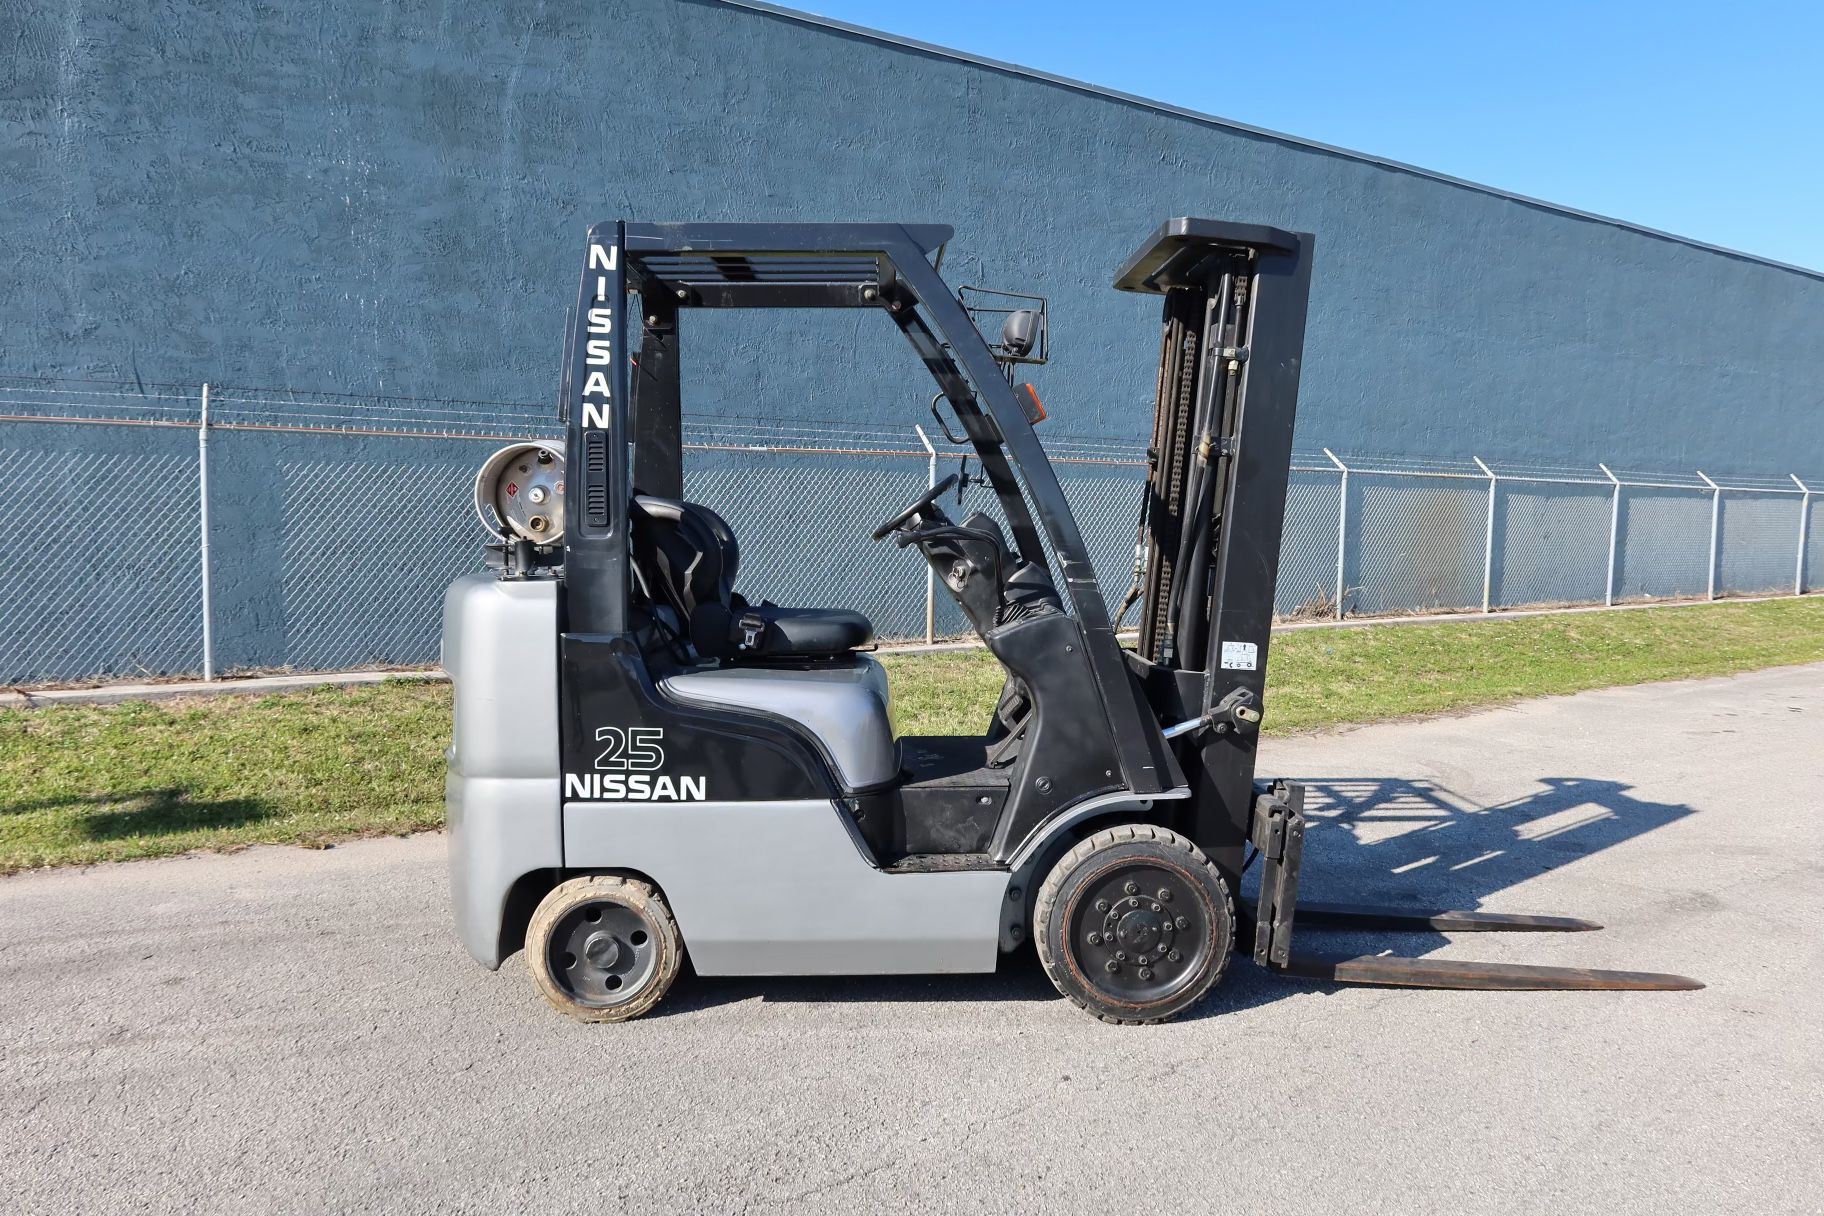 Nissan 25 Forklift 2006 Capacity 5,000 Lbs. 3 Stage Side Shift